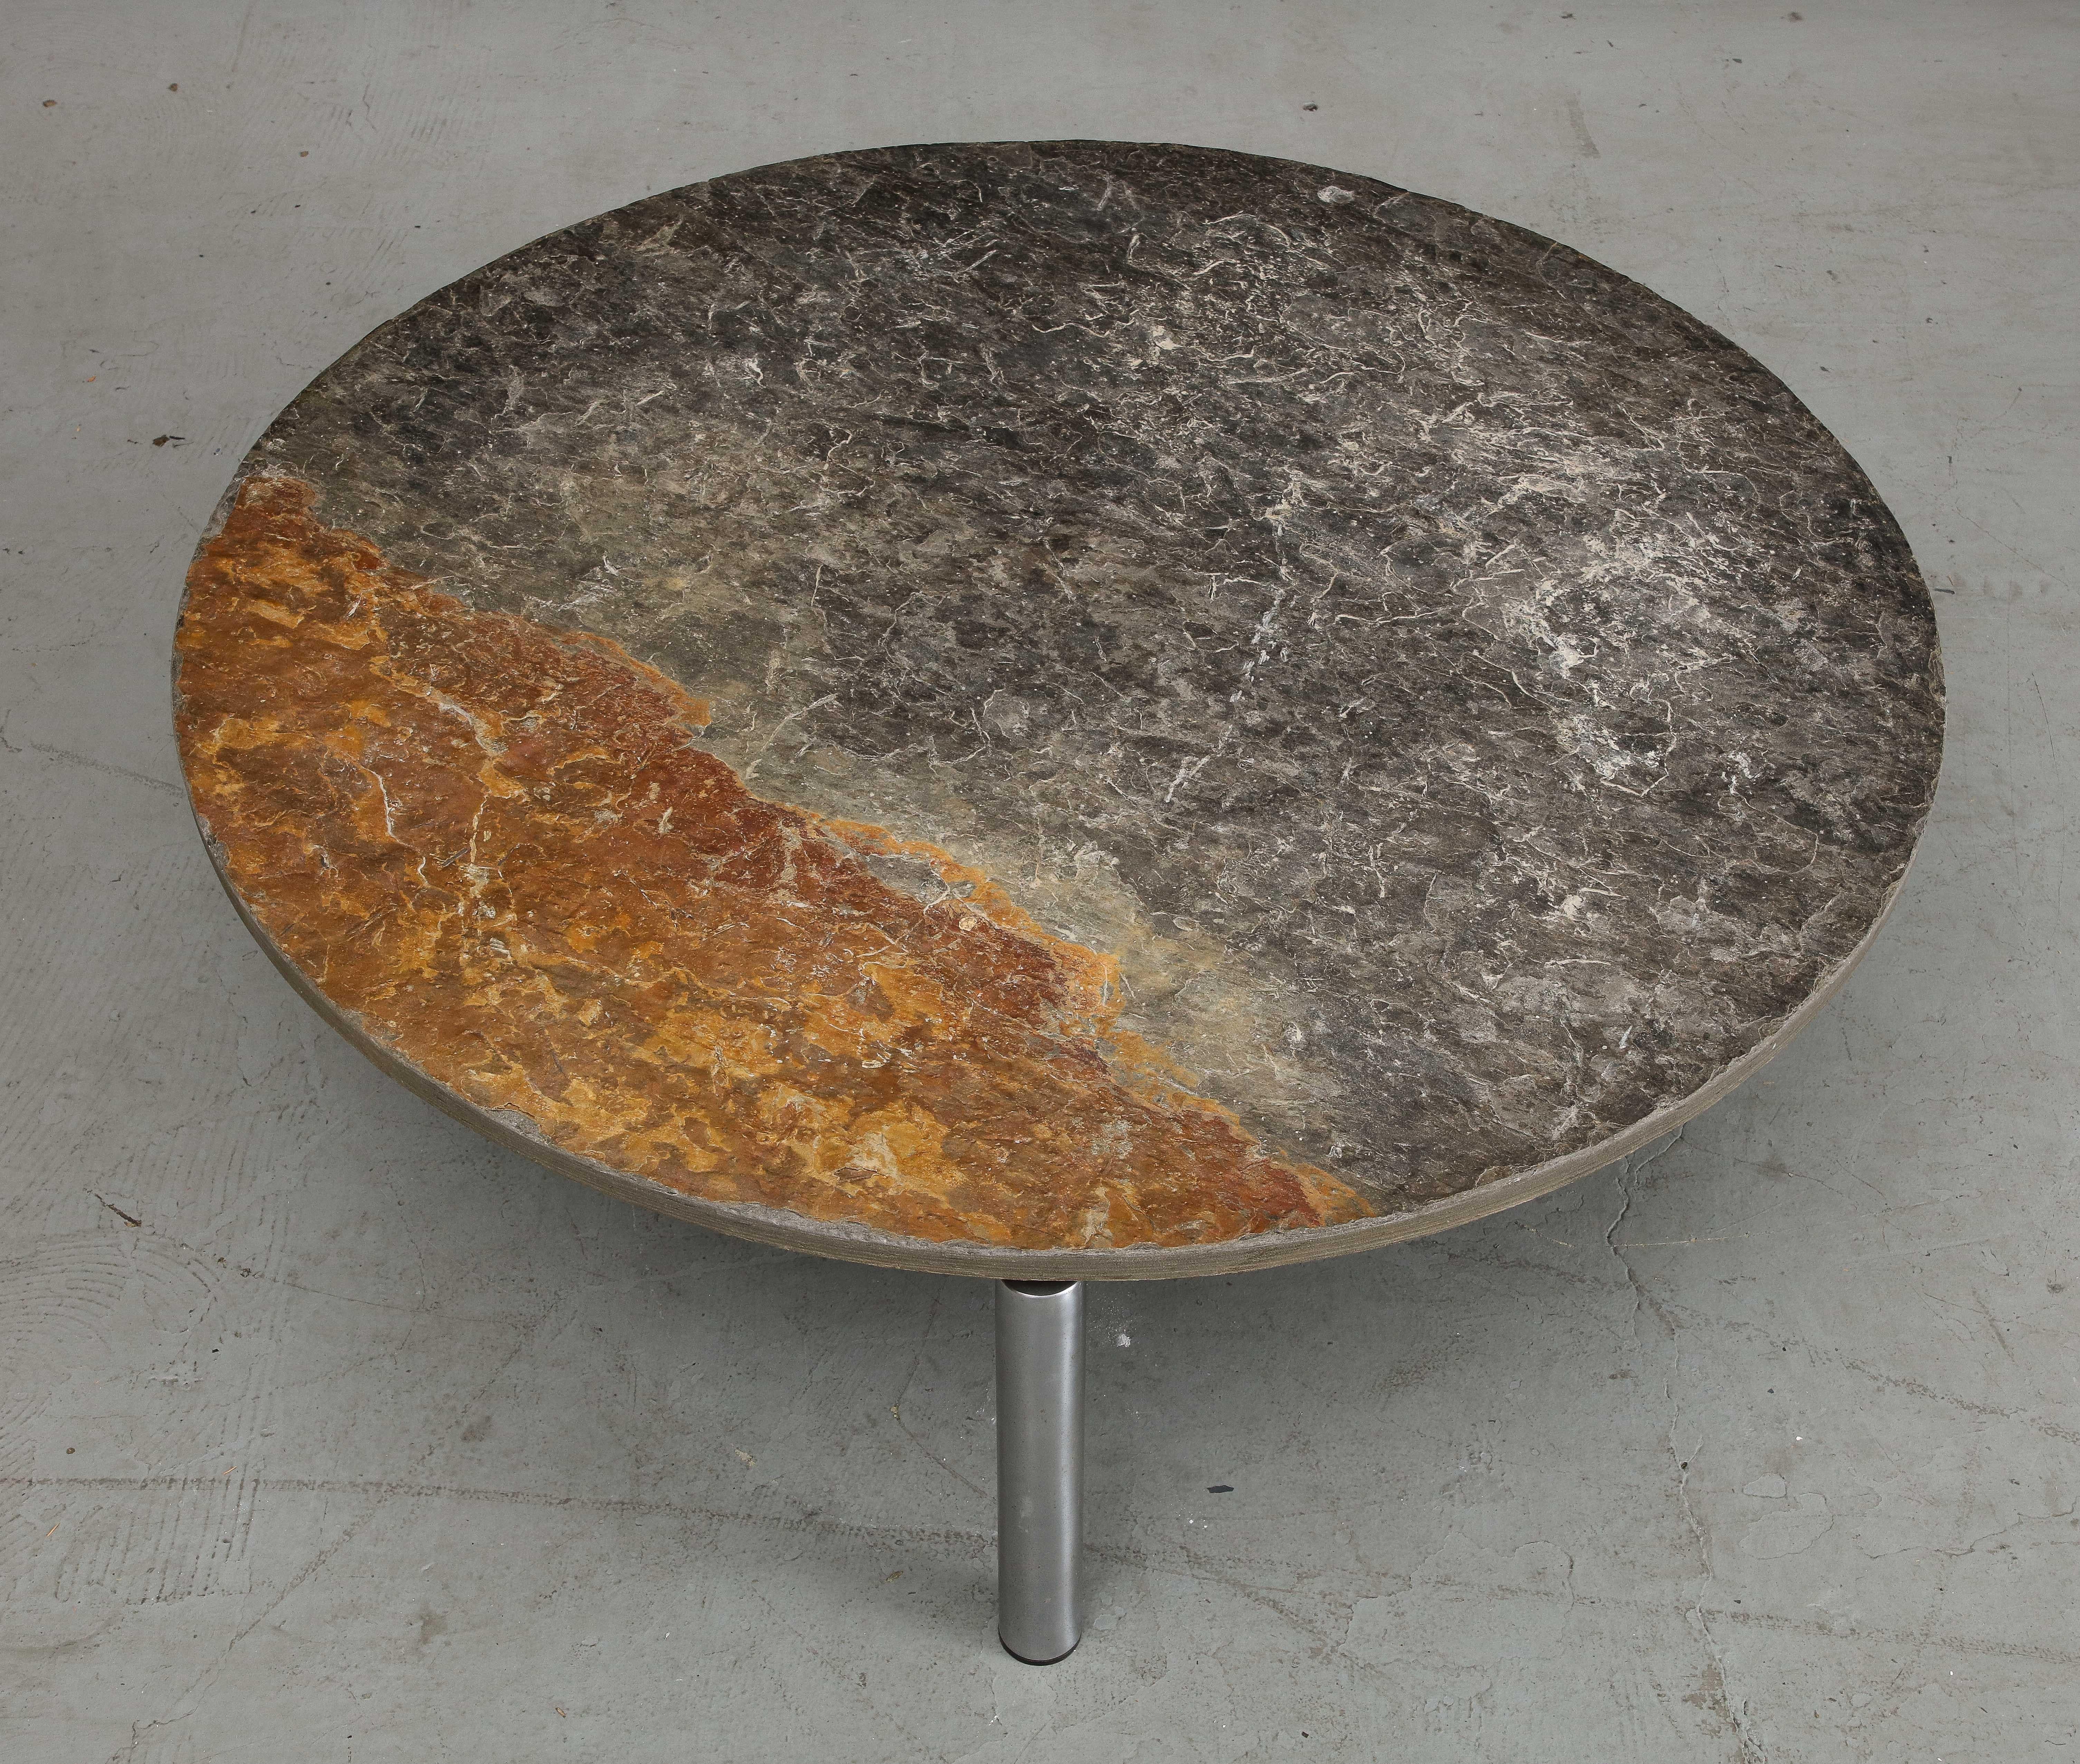 French Midcentury Chromed Steel Coffee Table with Round Natural Slate Top For Sale 1